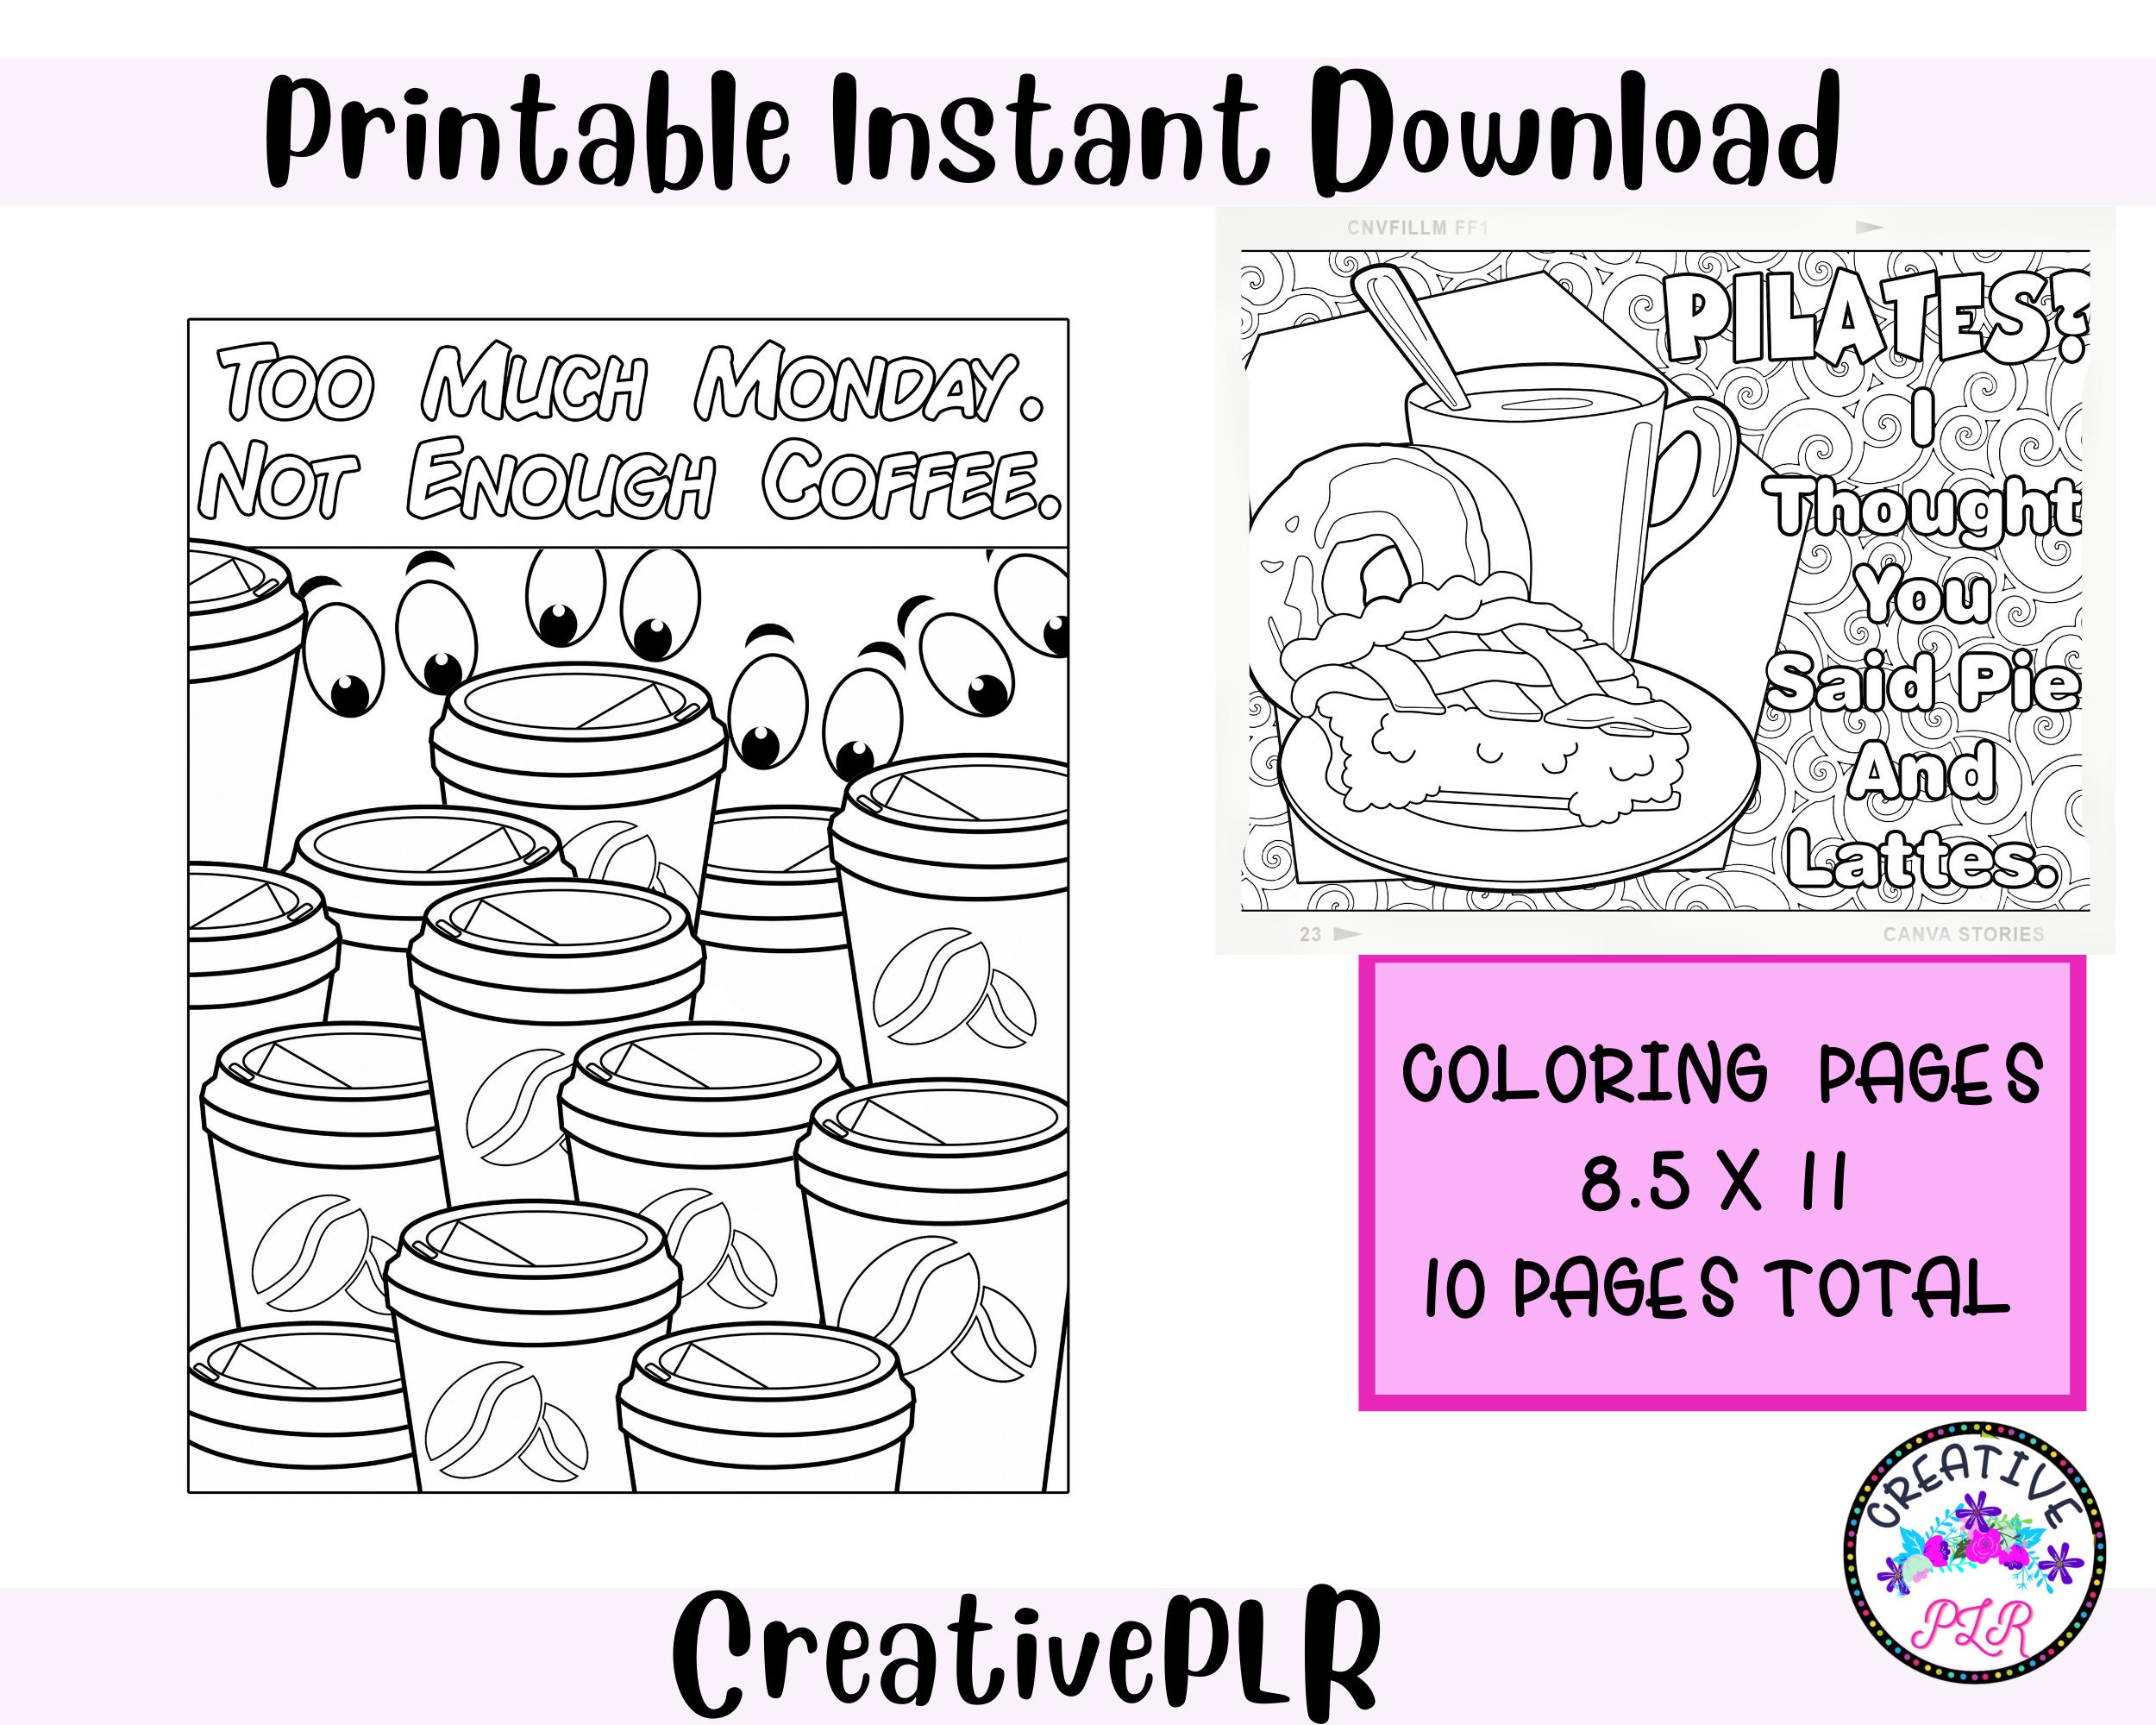 Coffee Coloring Pages - Free & Printable!